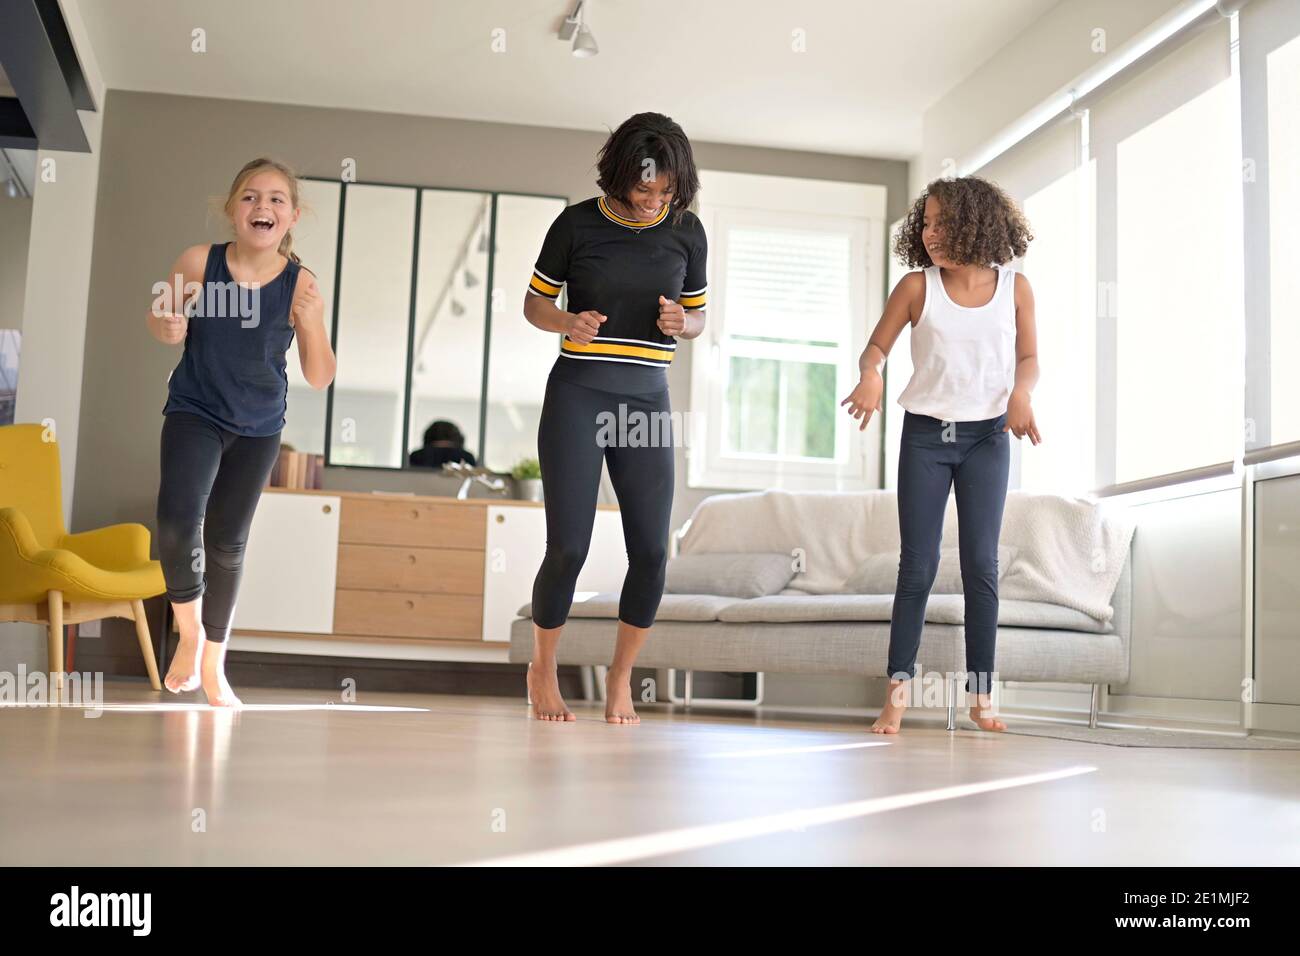 Woman with girls doing fitness exercices at home Stock Photo